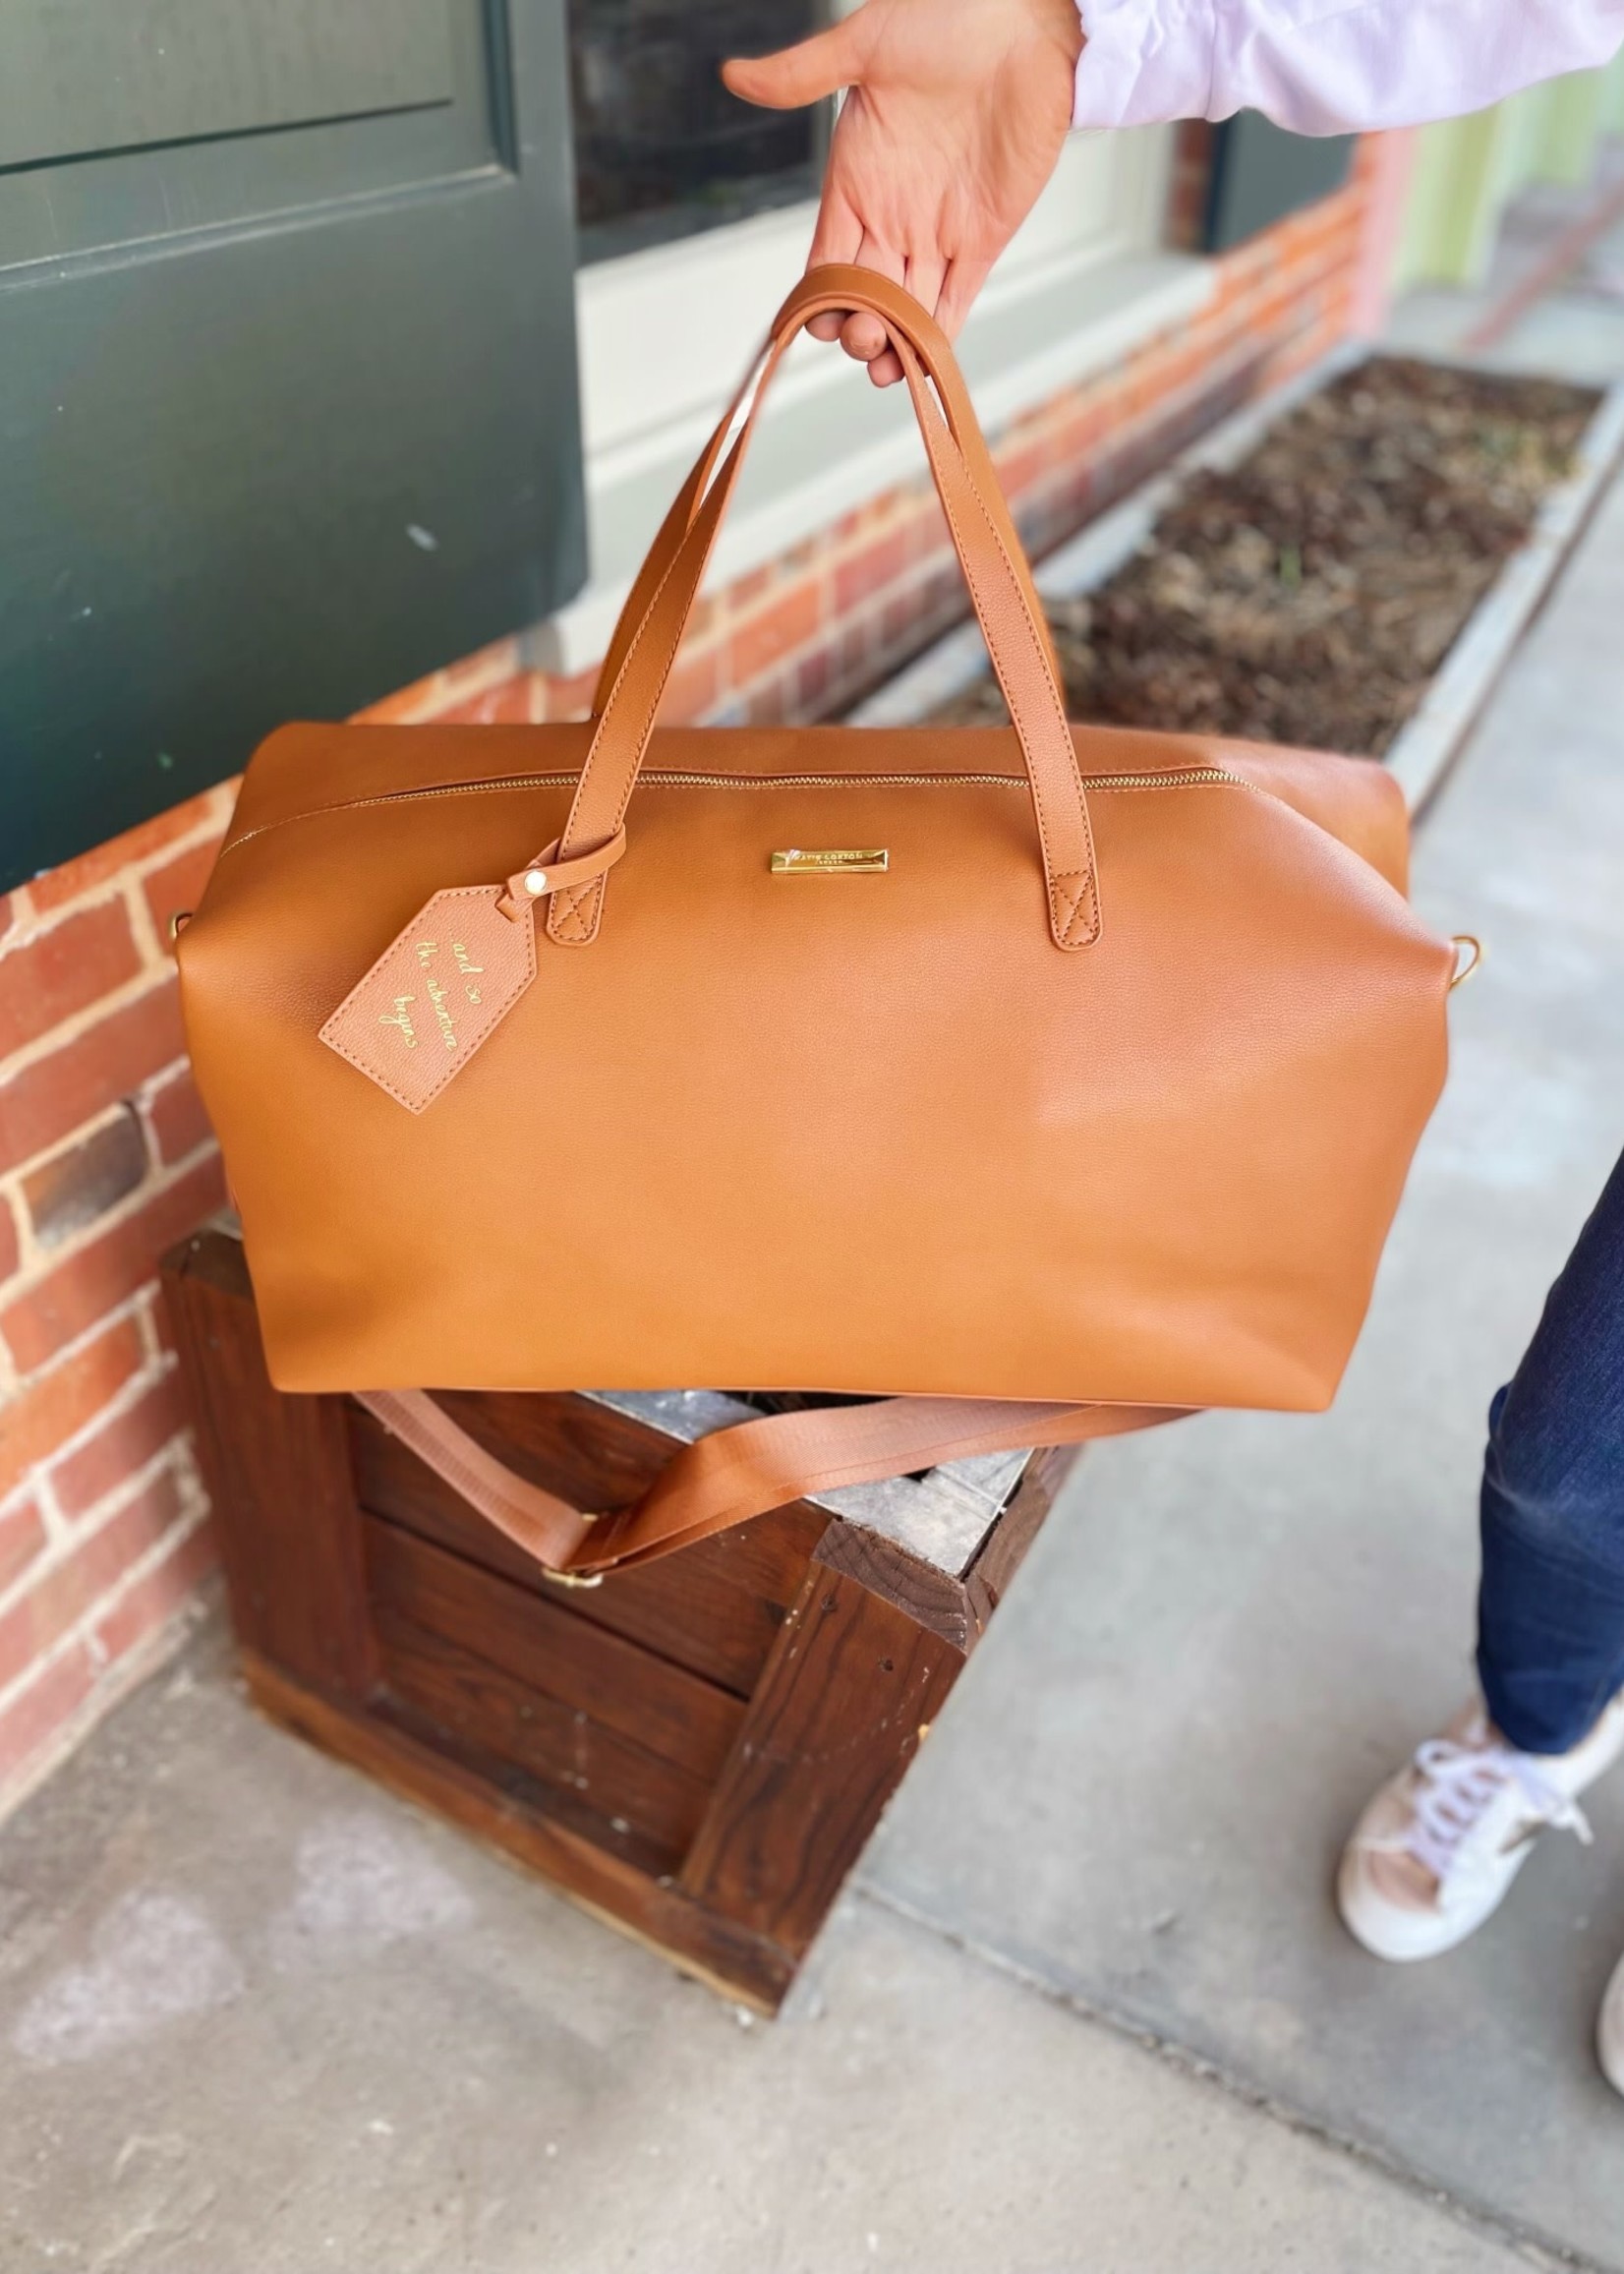 Bloom and Company Katie Loxton Camel London Weekender